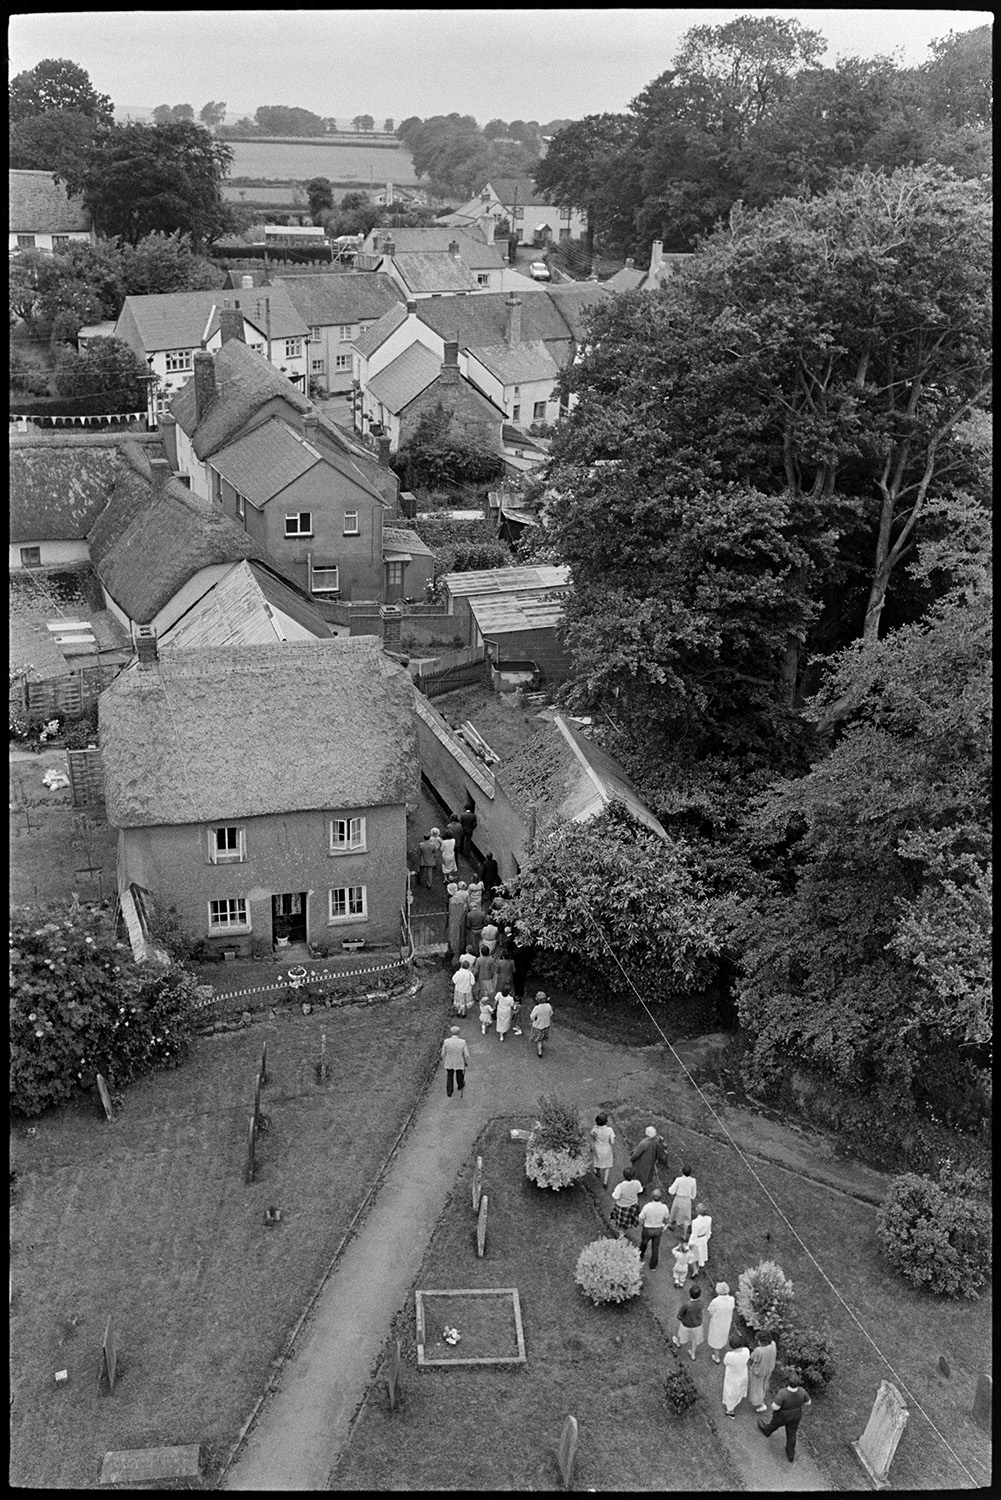 Procession in churchyard with Fair Queen at start of Fair. Graveyard and gravestones. 
[A view taken from Winkleigh Church tower of people processing down the church path before Winkleigh Fair. Gravestones in the churchyard and houses in the village can be seen.]